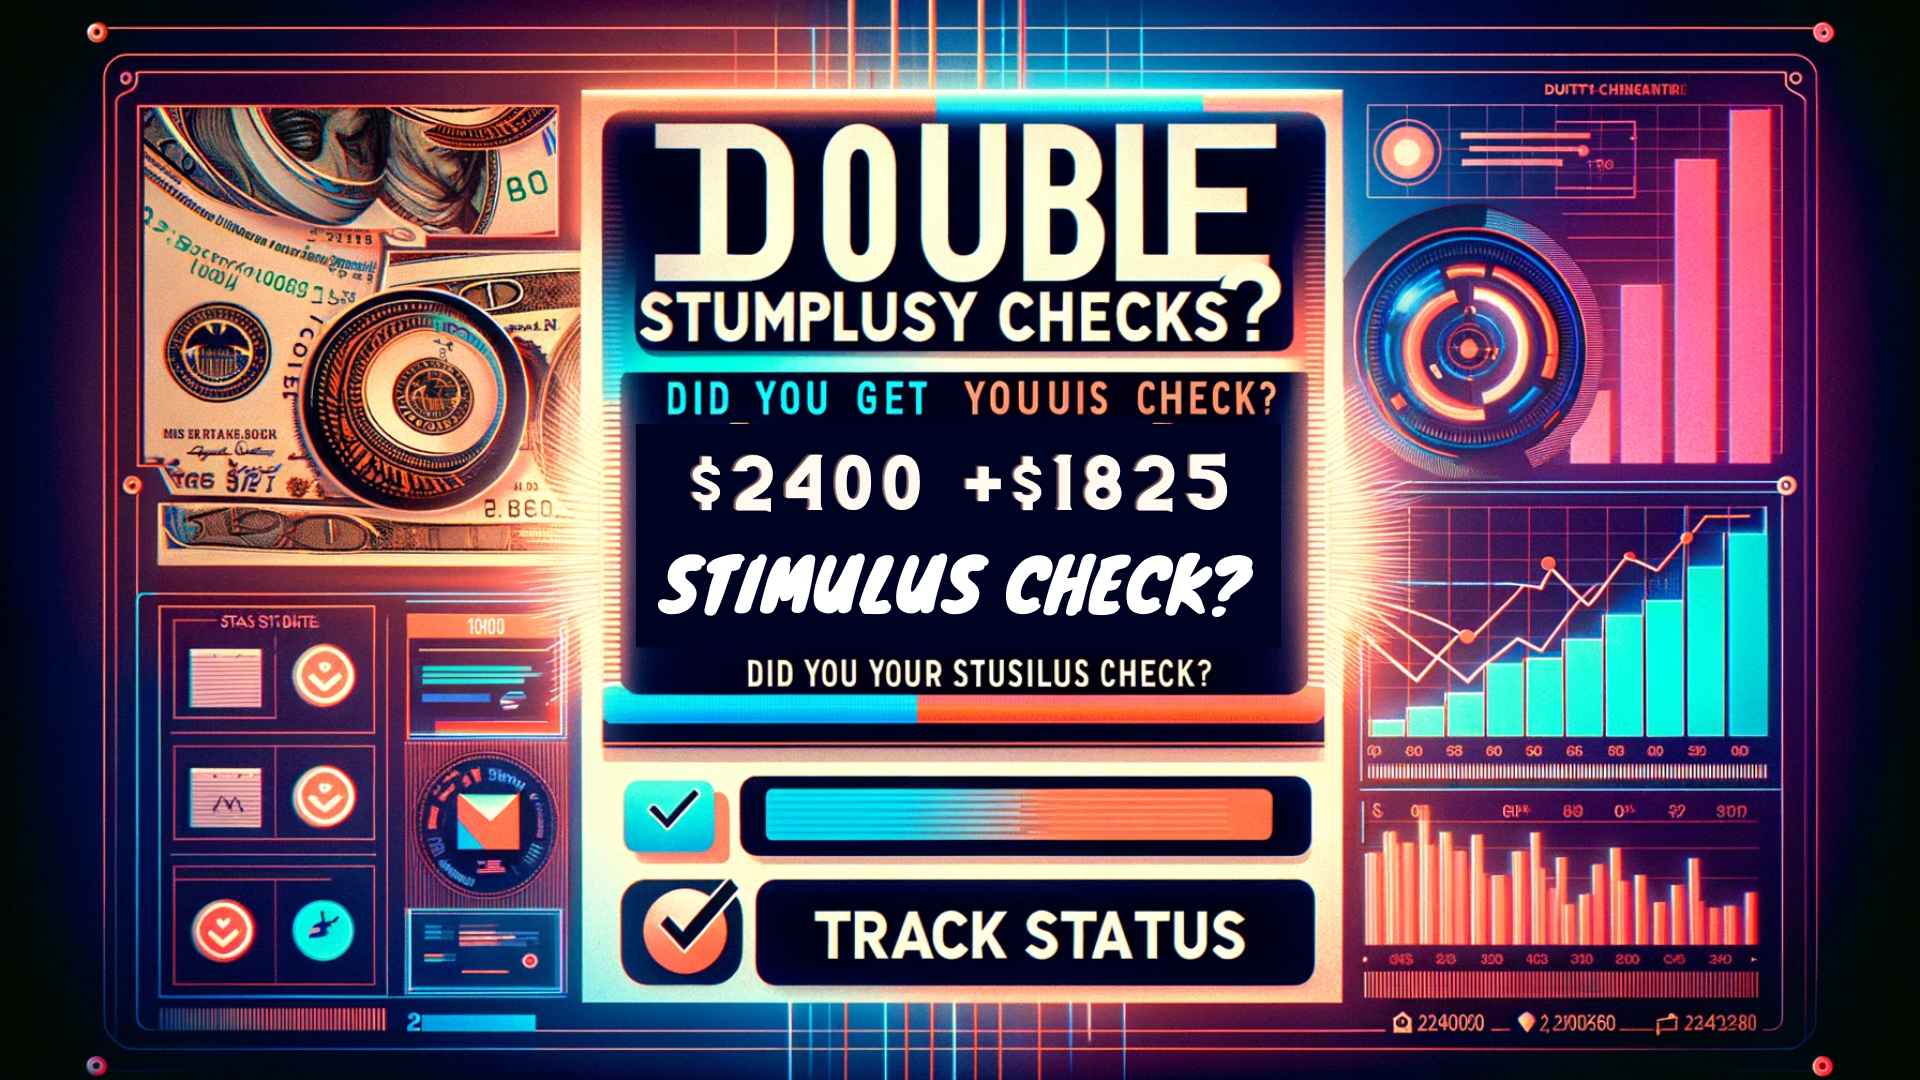 Double Stimulus Checks (2400+1825) Sent? Did You Get Your Stimulus Check?